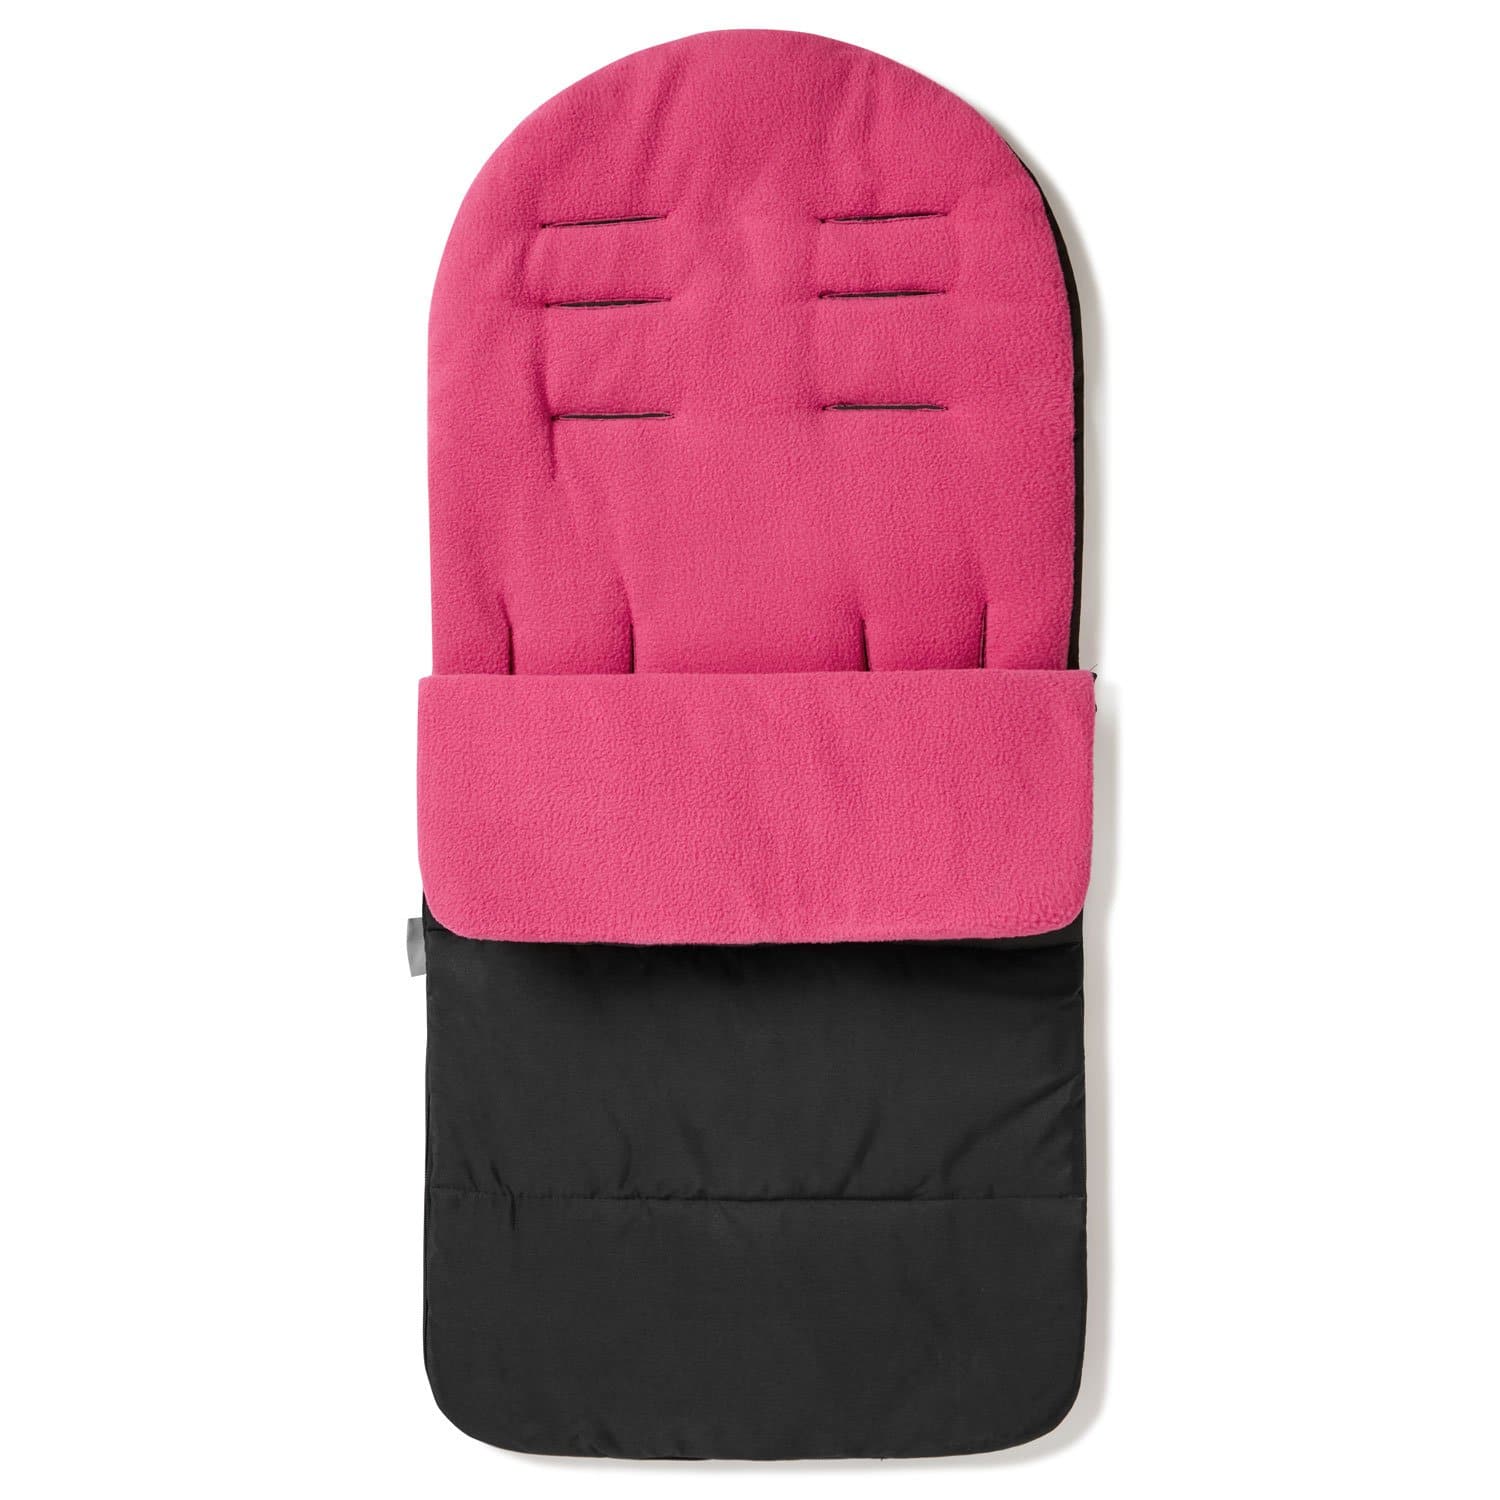 Premium Footmuff / Cosy Toes Compatible with Roma - Pink Rose / Fits All Models | For Your Little One